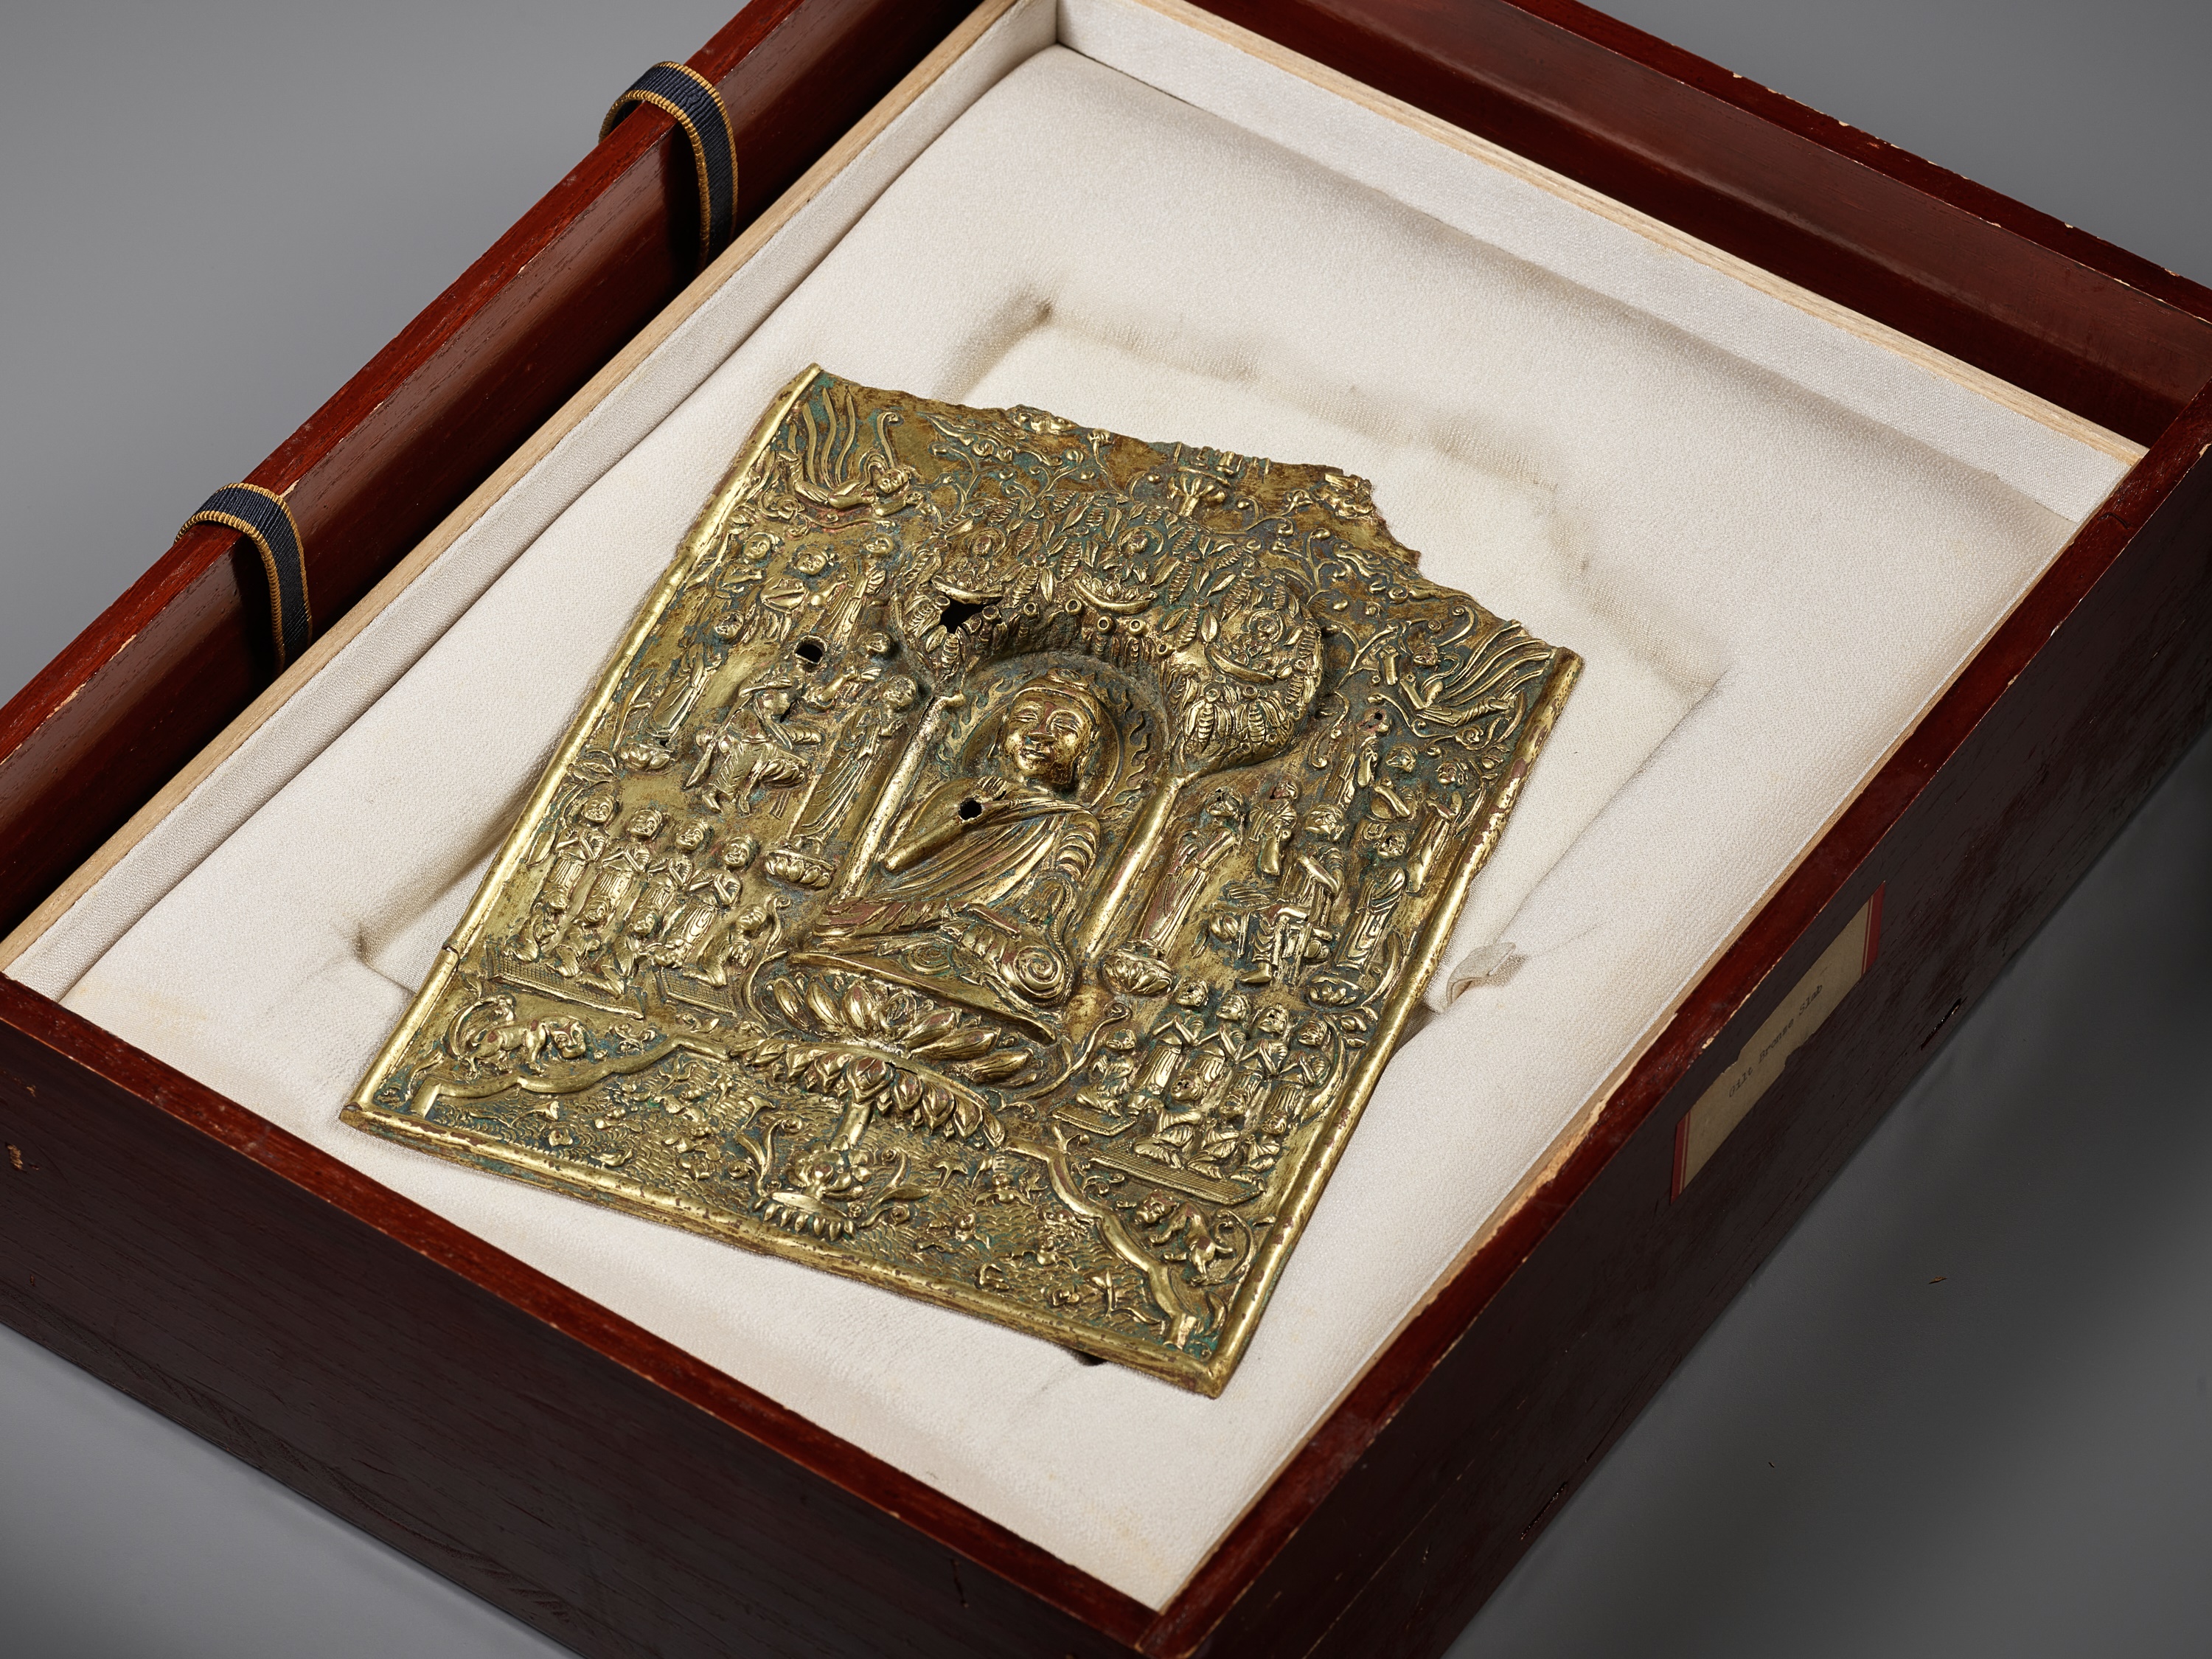 A LARGE AND IMPORTANT BUDDHIST VOTIVE PLAQUE, GILT COPPER REPOUSSE, EARLY TANG DYNASTY - Image 11 of 21